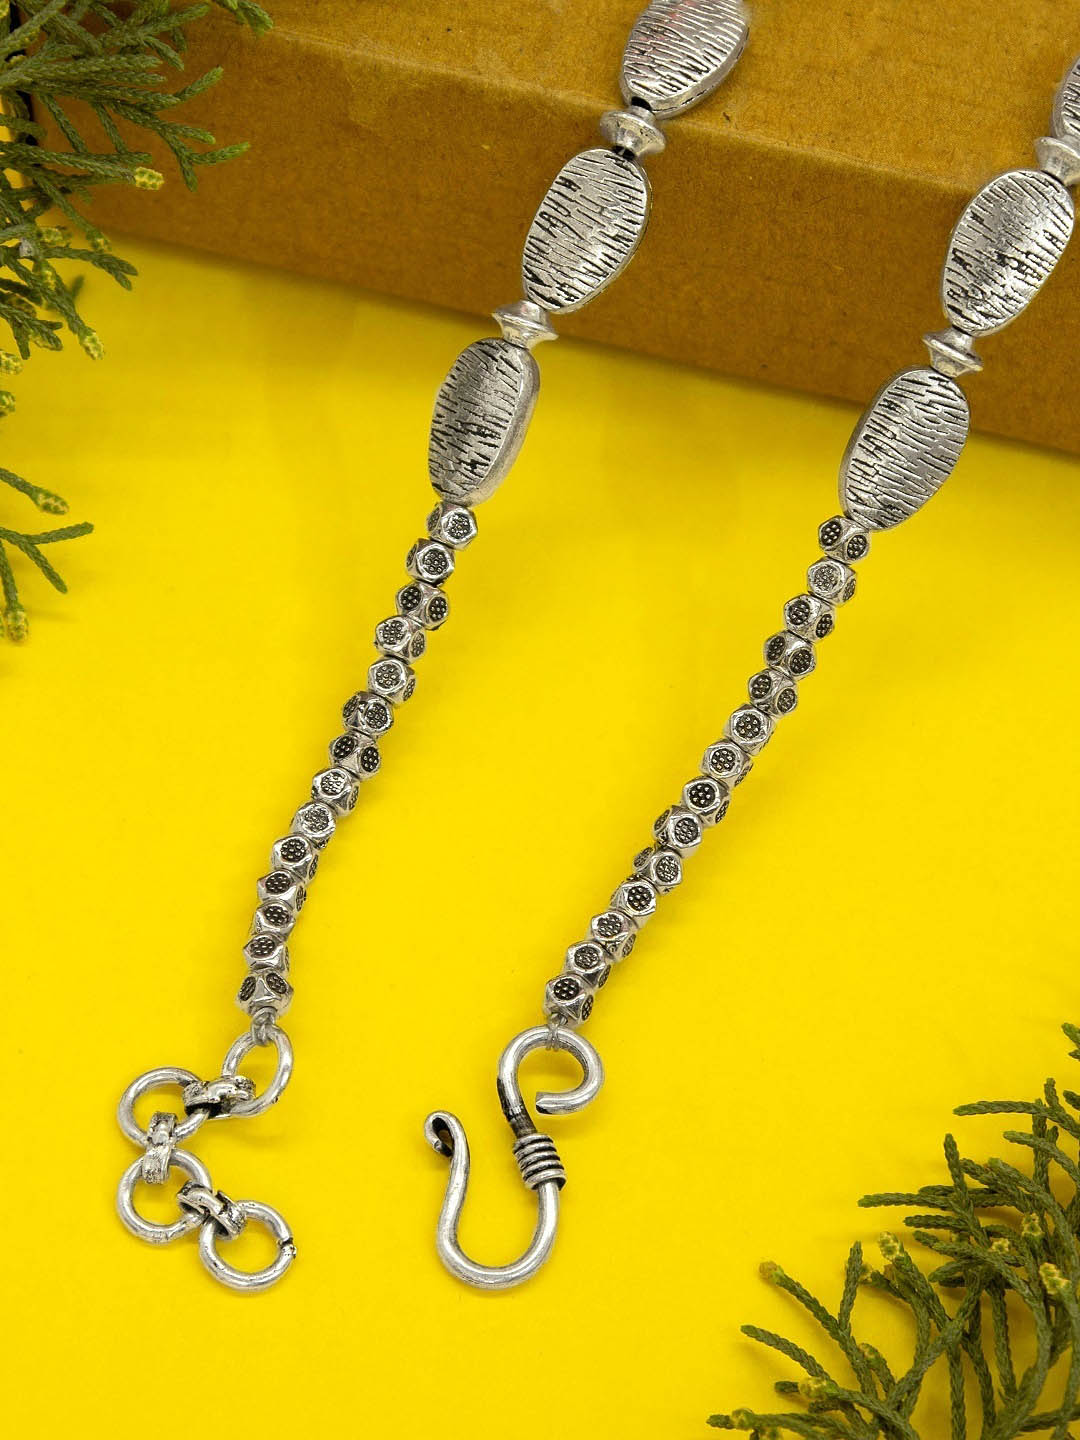 Handcrafted German Silver oval shape necklace set